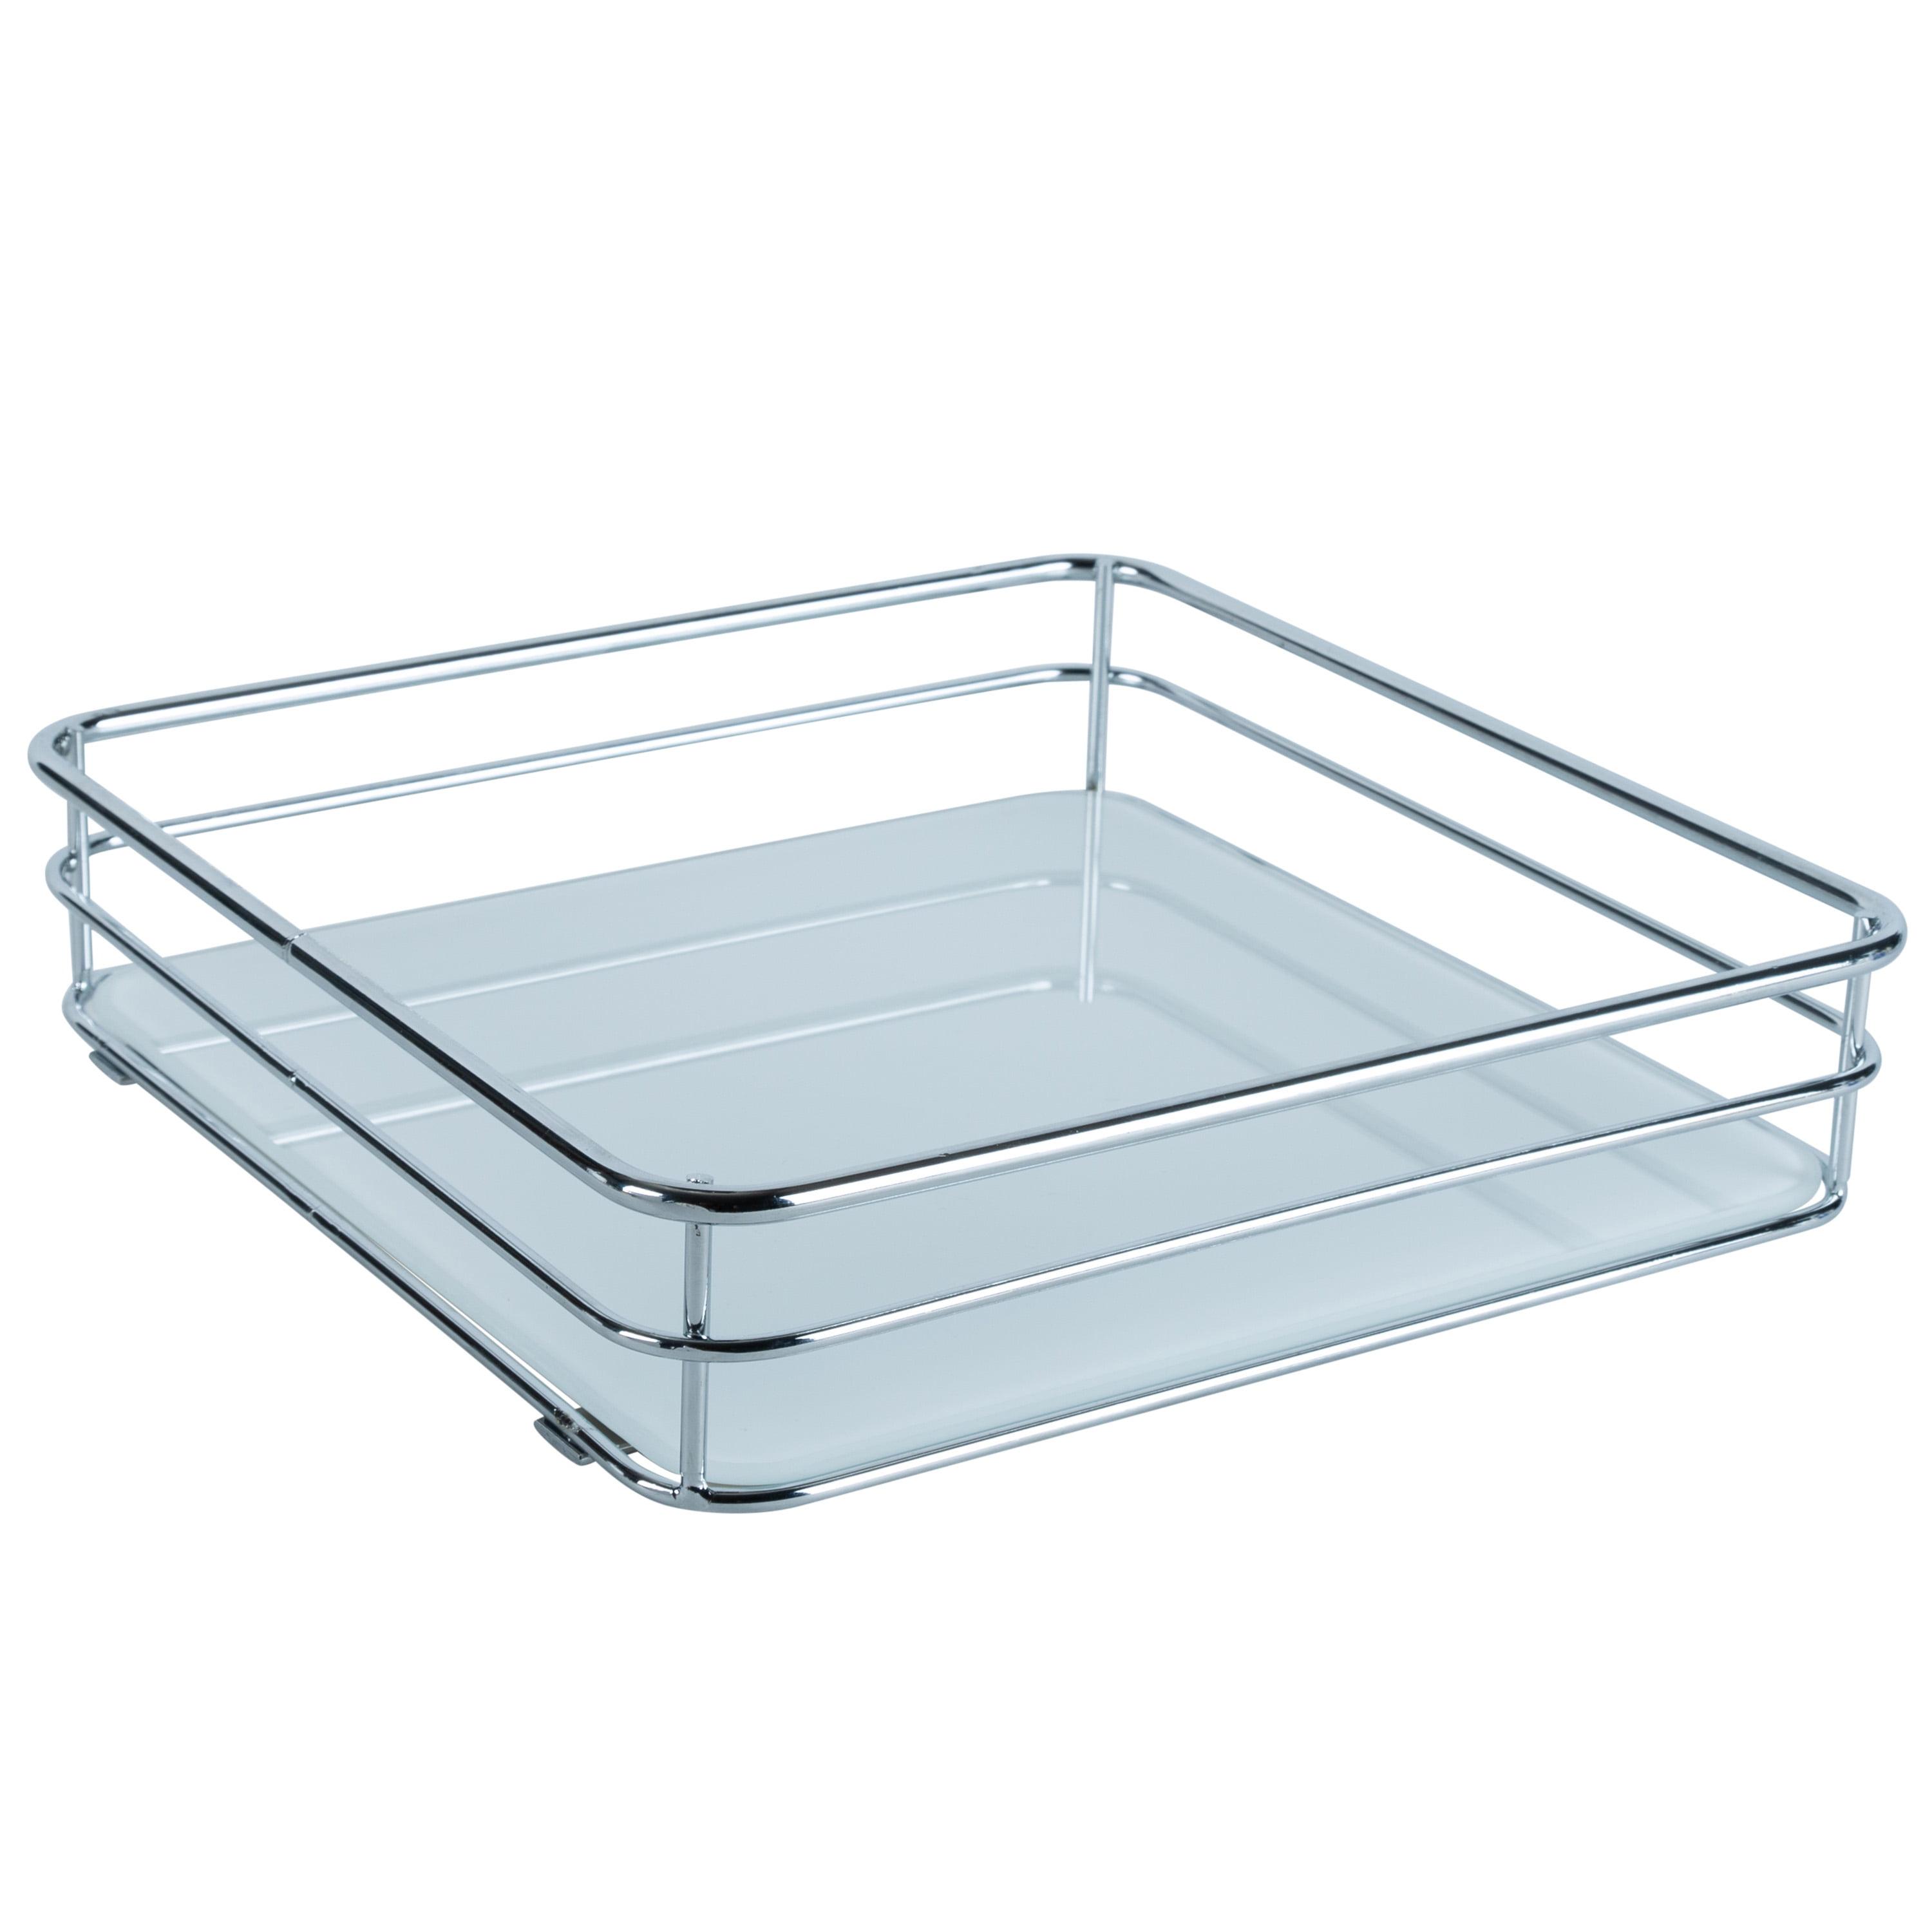 Elegant Chrome-Finished Square Vanity Tray with Tempered Glass